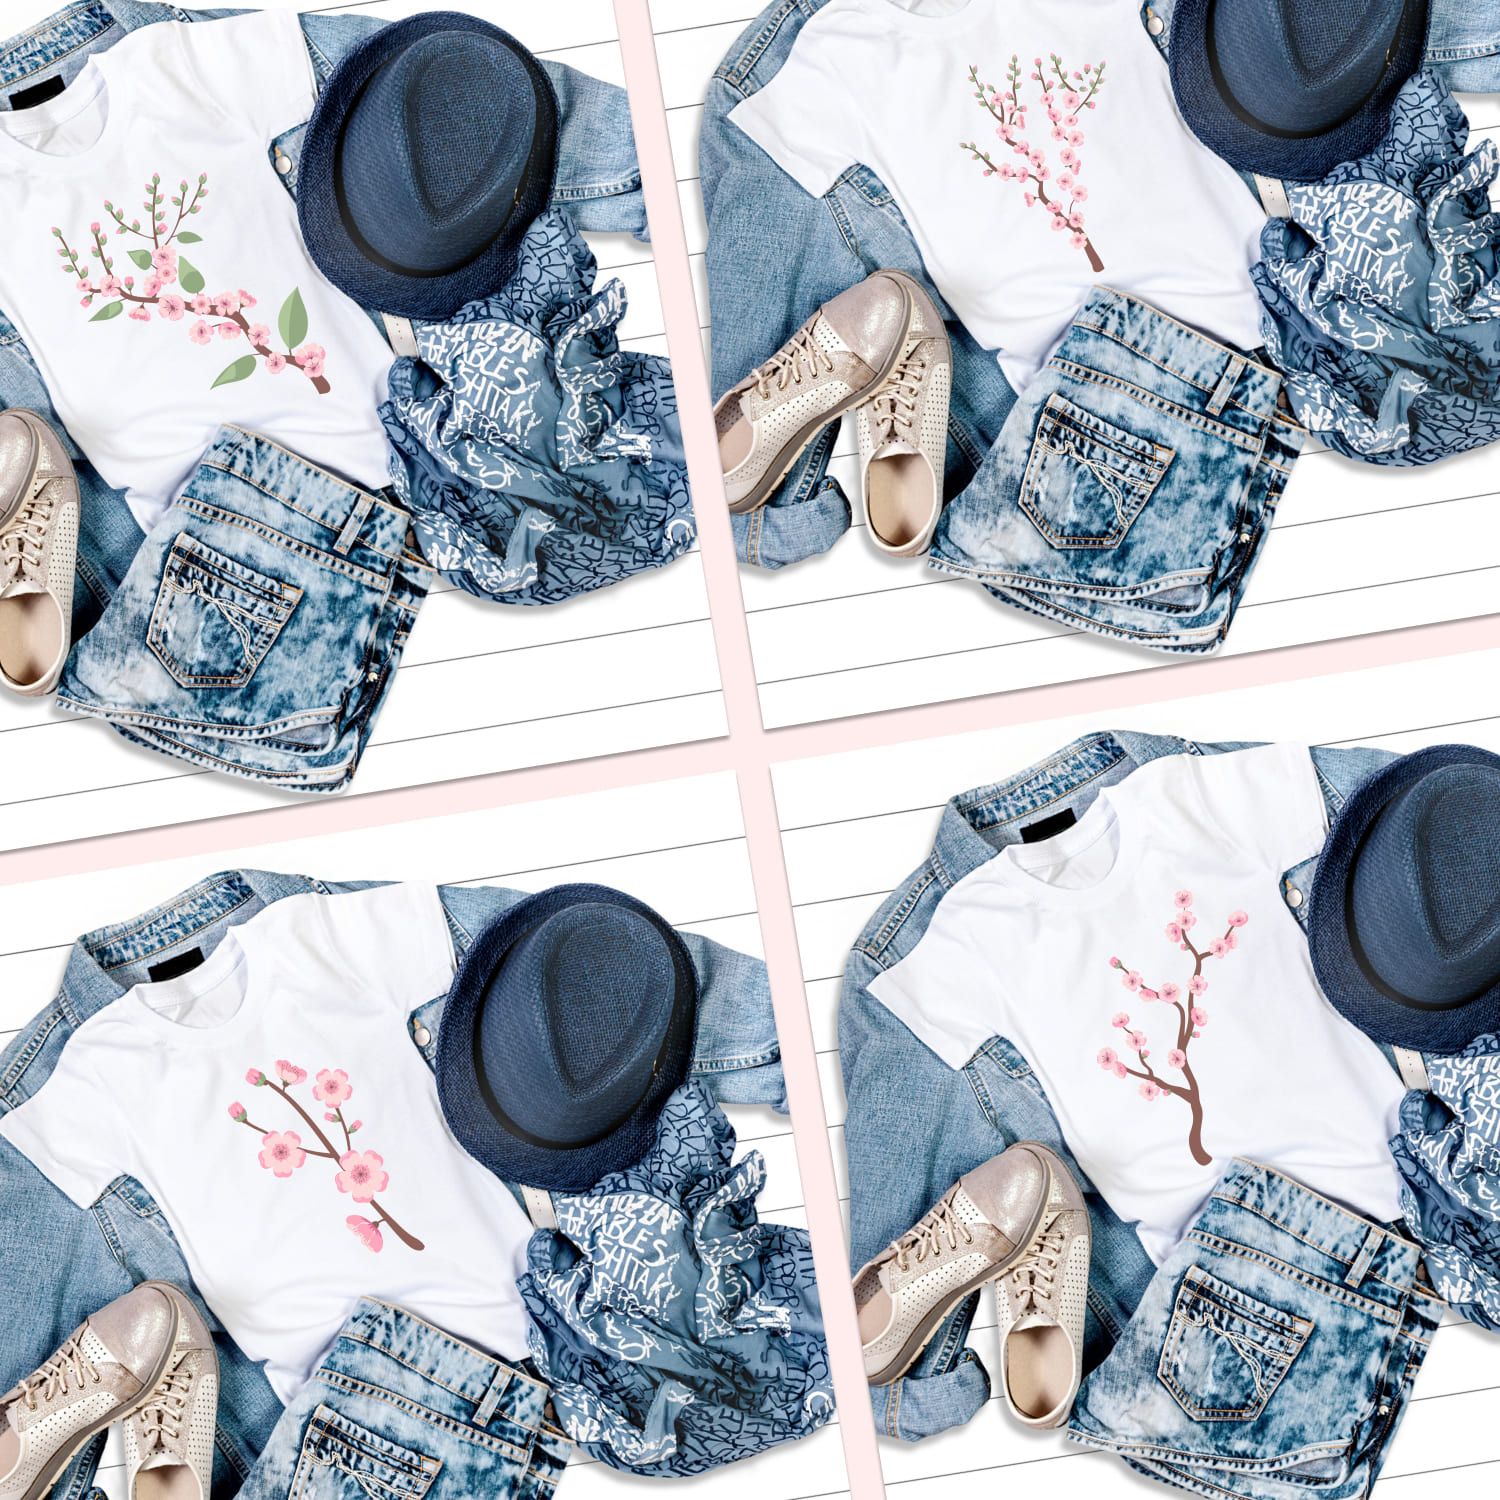 Prints with cherry blossom tree on t-shirt designs.